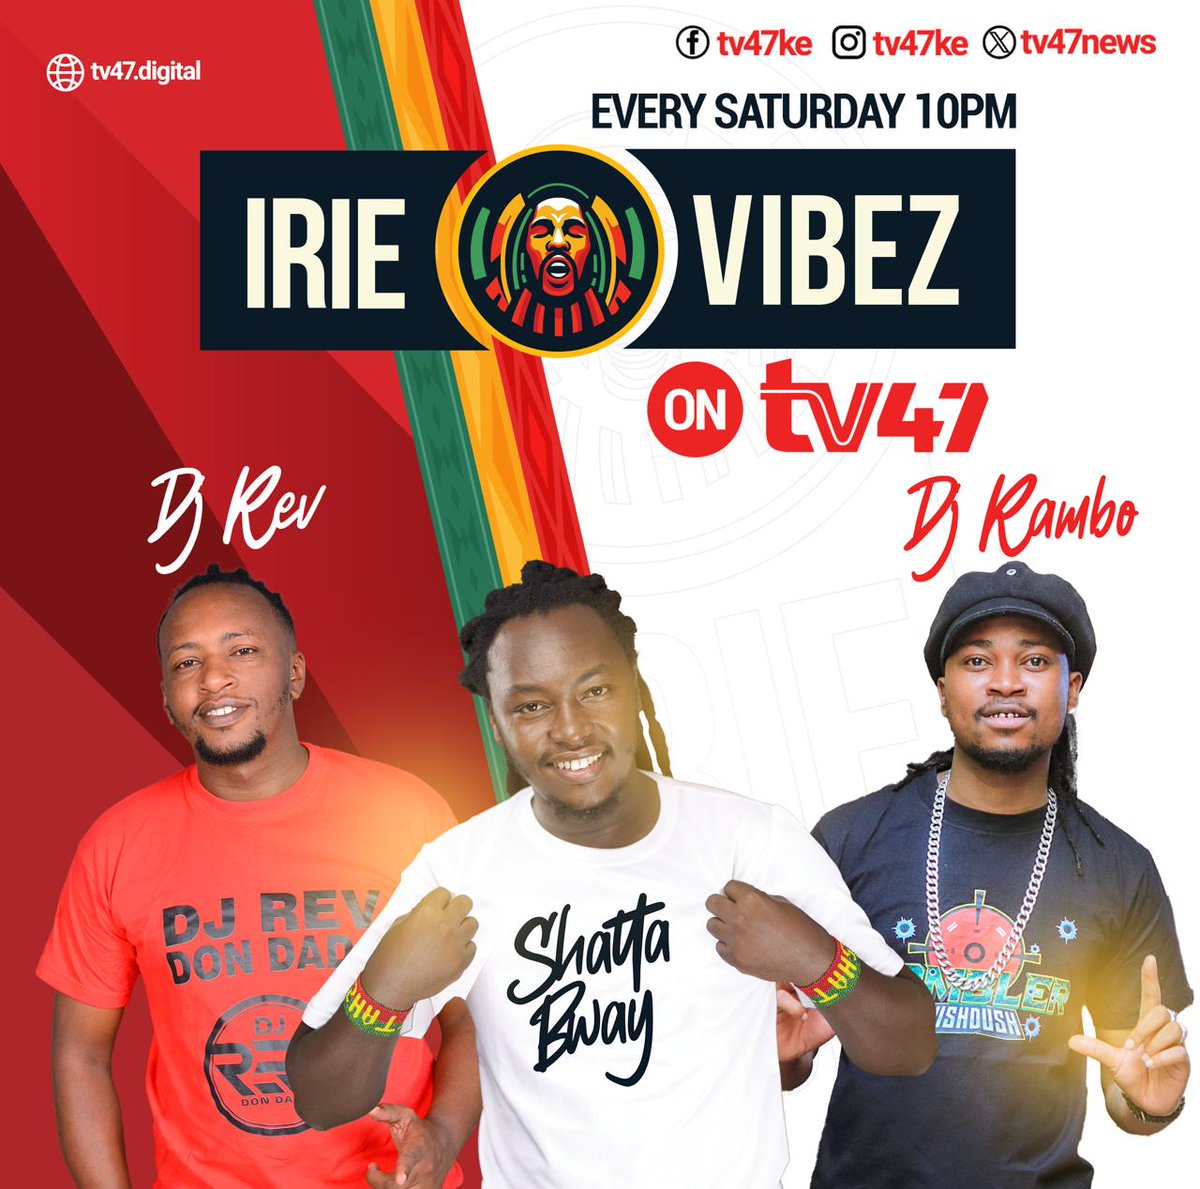 Don't miss out on the launch of Irie Vibes tonight on TV47. Hosted by Shatta Buay, this show promises to be a weekly celebration of reggae music and positivity starting at 10pm.#IrieVibezTV47 .